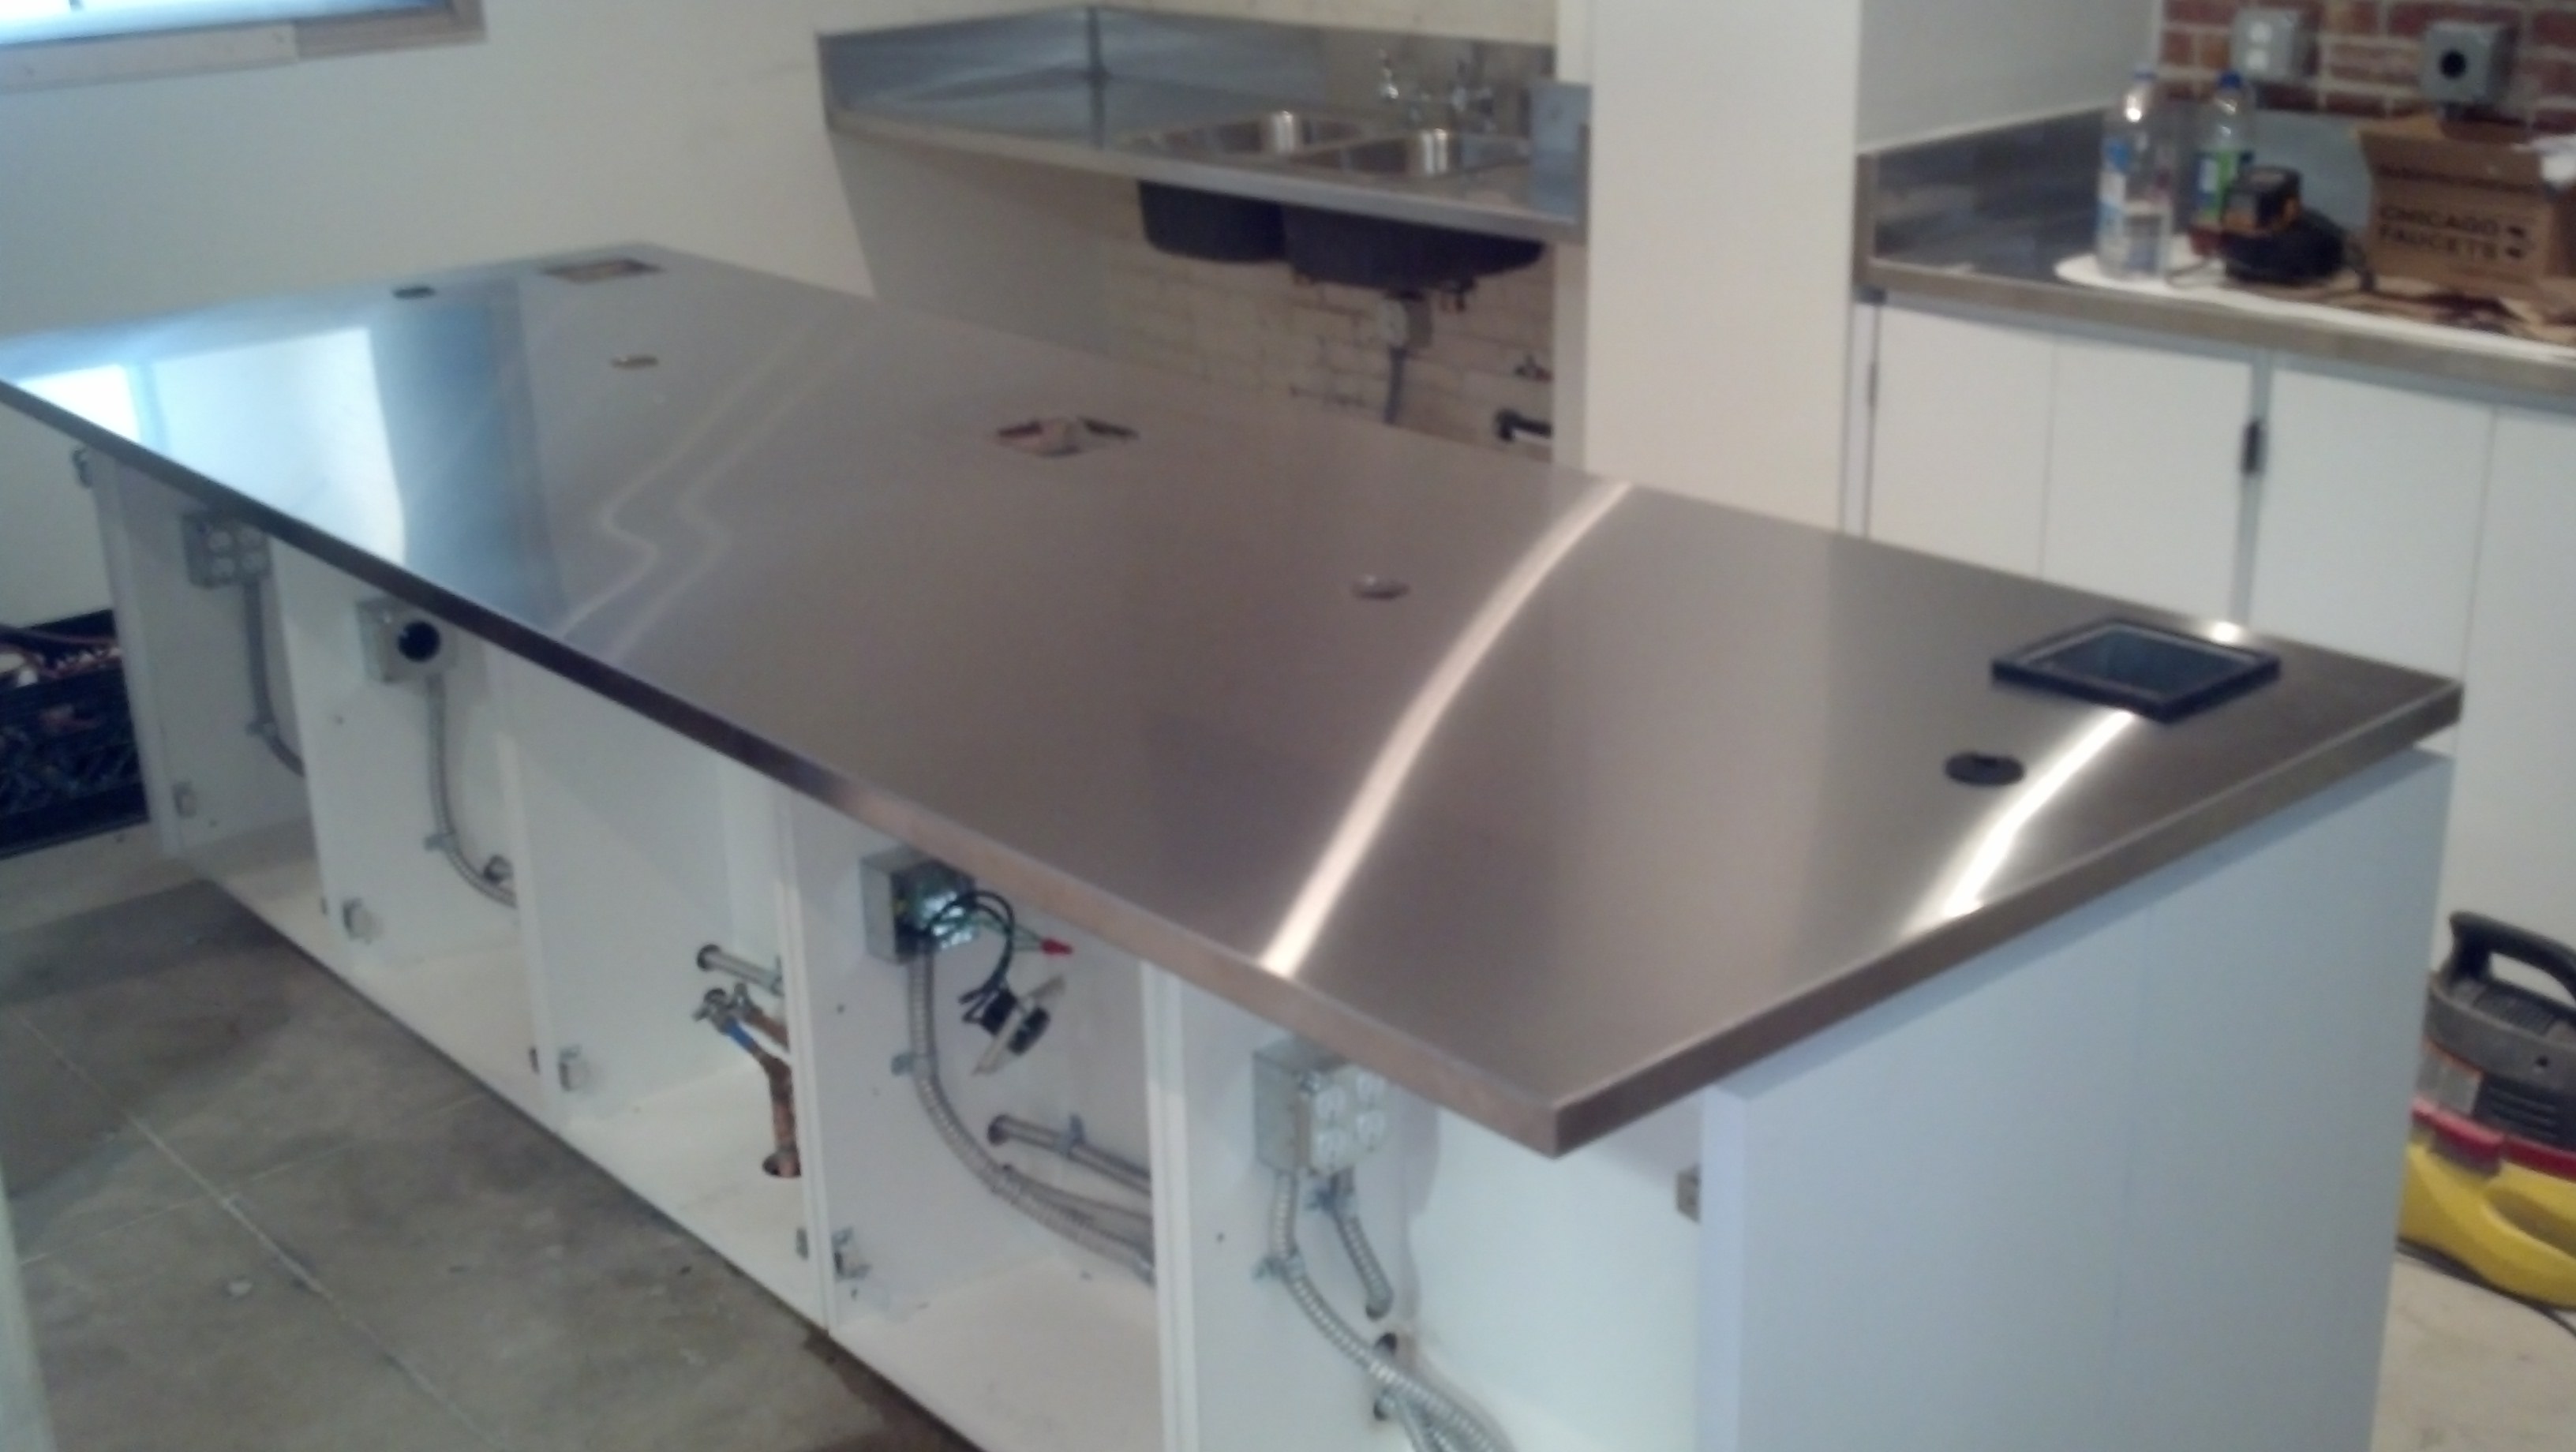 Stainless Countertop with knock box